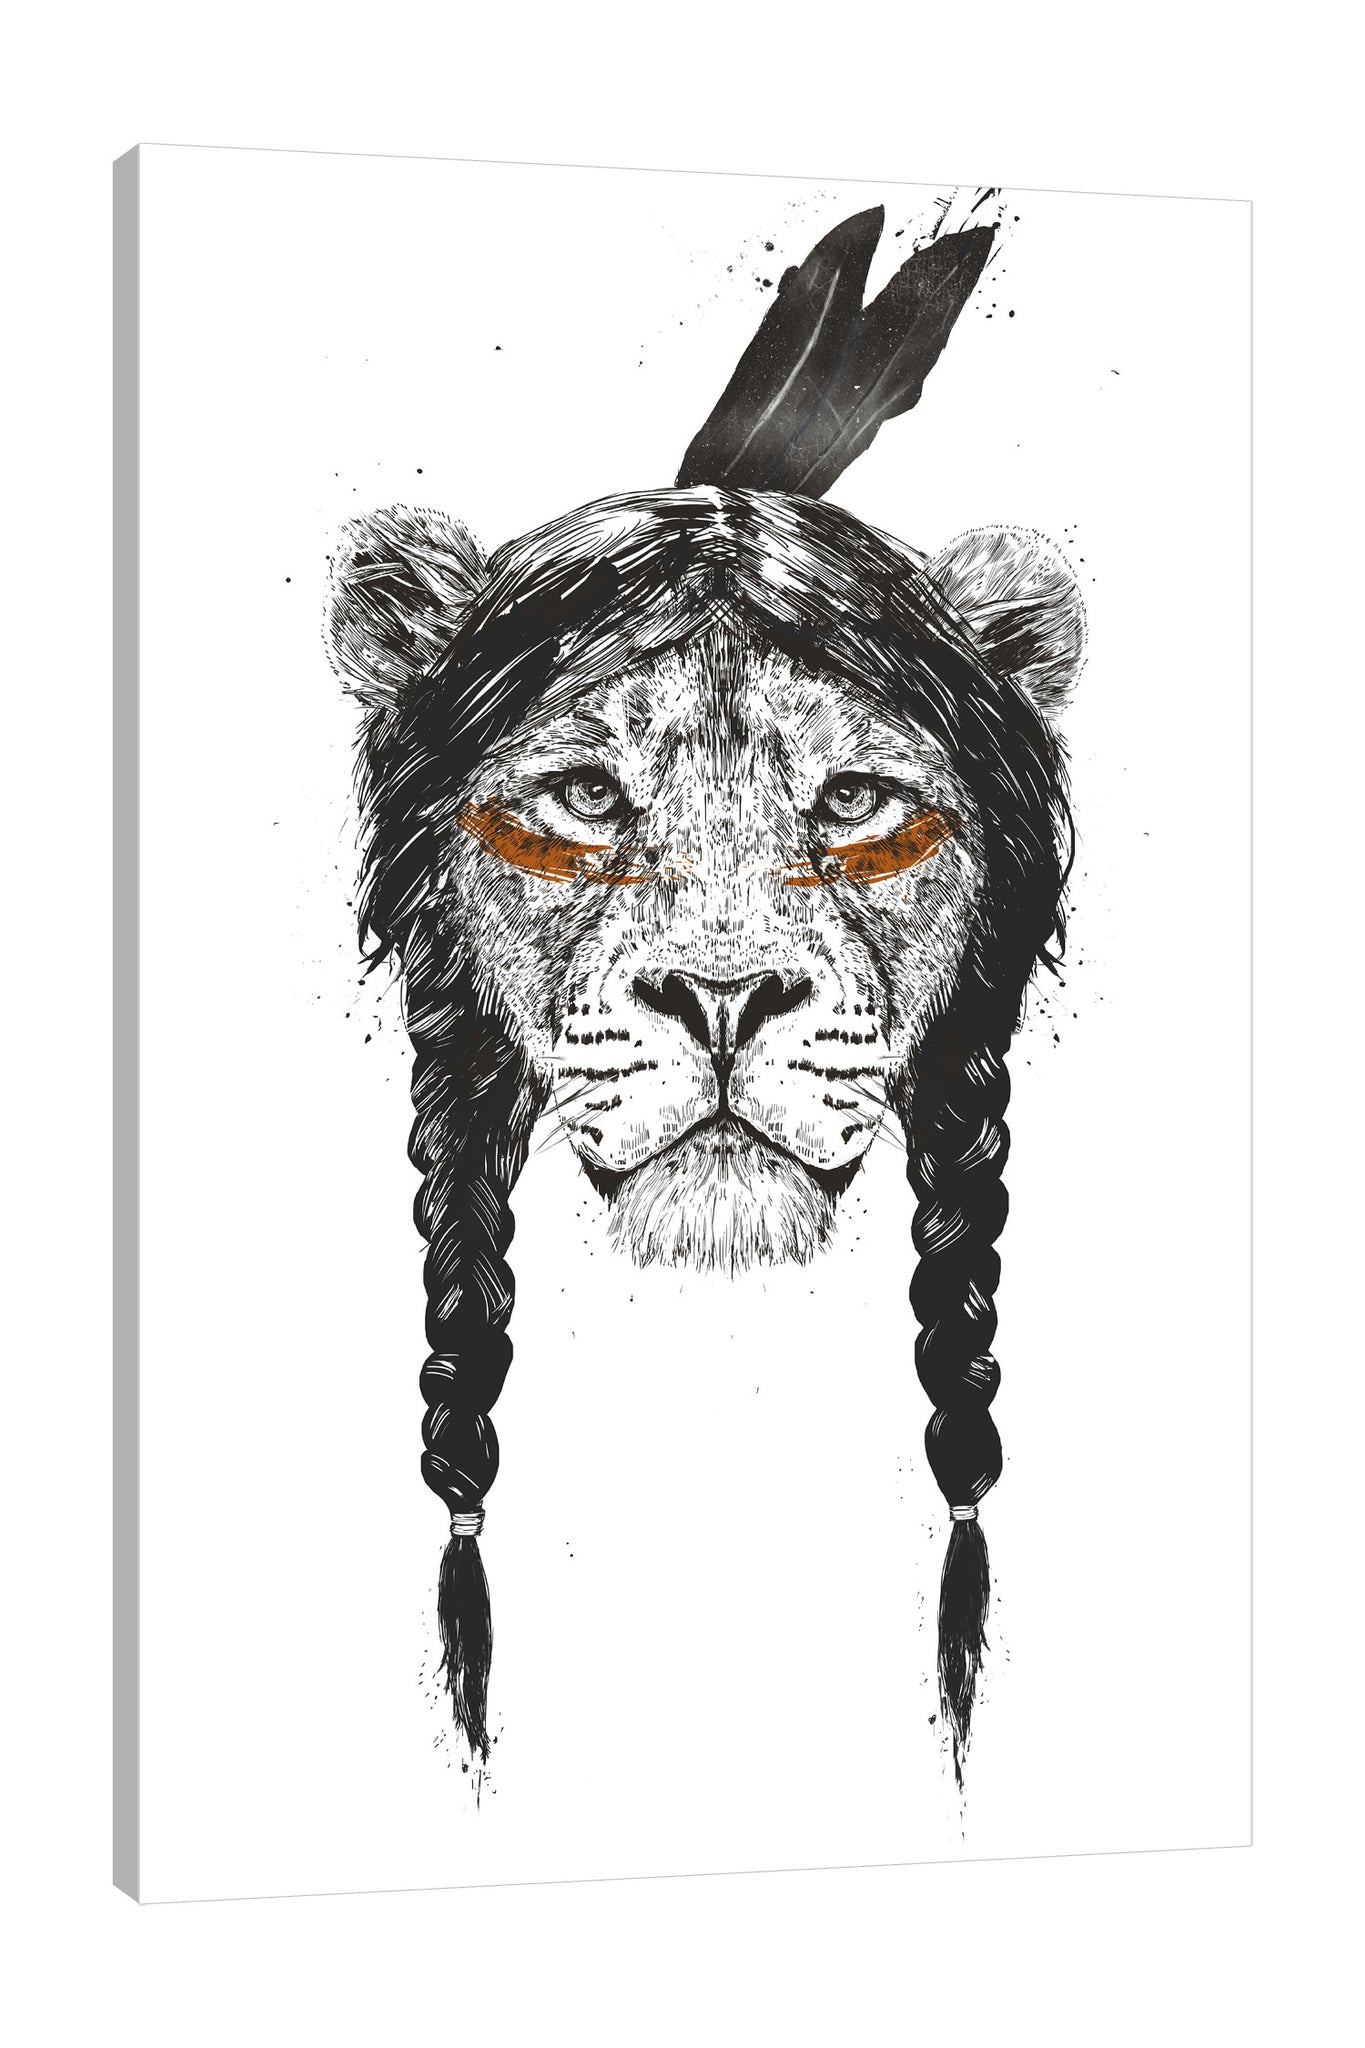 Balazs-Solti,Modern & Contemporary,Animals,animals,animal,lions,lion,braids,brad,warrior,warriors,feathers,feather,brave,spots,spot,Mist Gray,Charcoal Gray,White